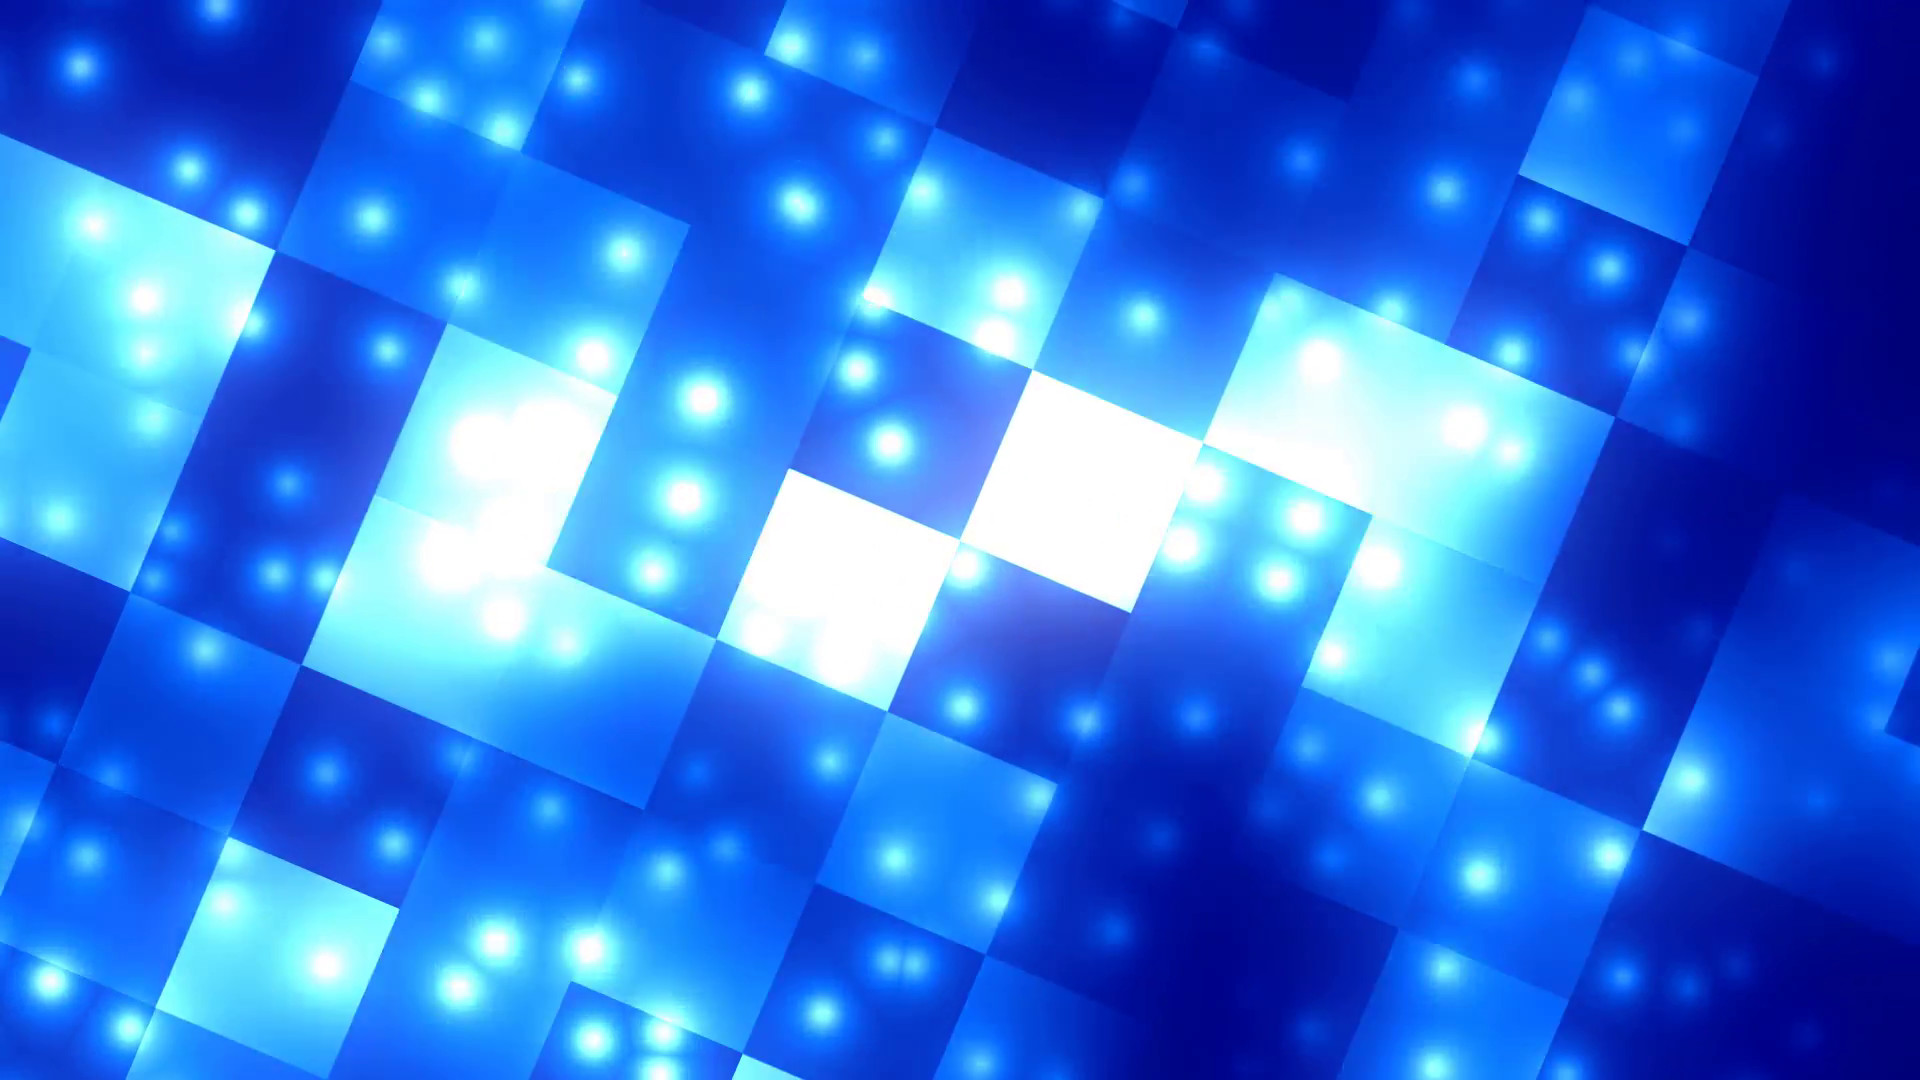 1920x1080 Dance Party Floor 2 Loopable Background Motion Background - VideoBlocks